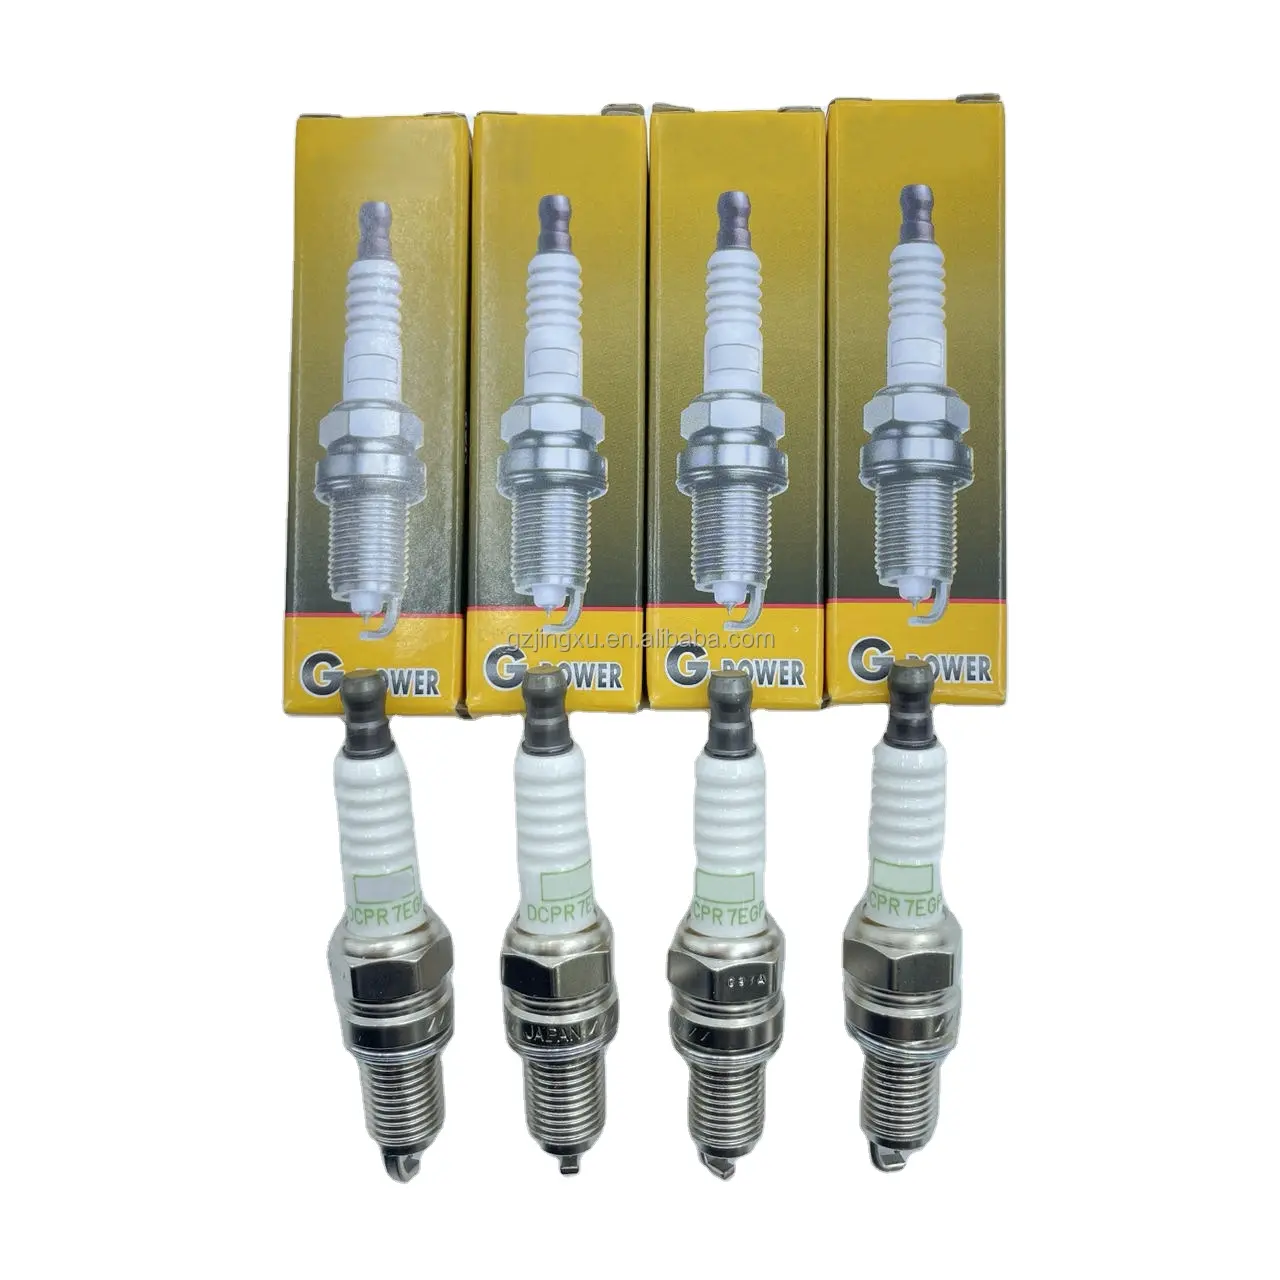 LZKR6B-E BKR6E DILKAR8J9G IFR5T11 DILZKR7A11GS ILZKBR7B8DG SILZKFR8D7S Factory Auto Candles Bujias Bougies Spark Plugs For NGK